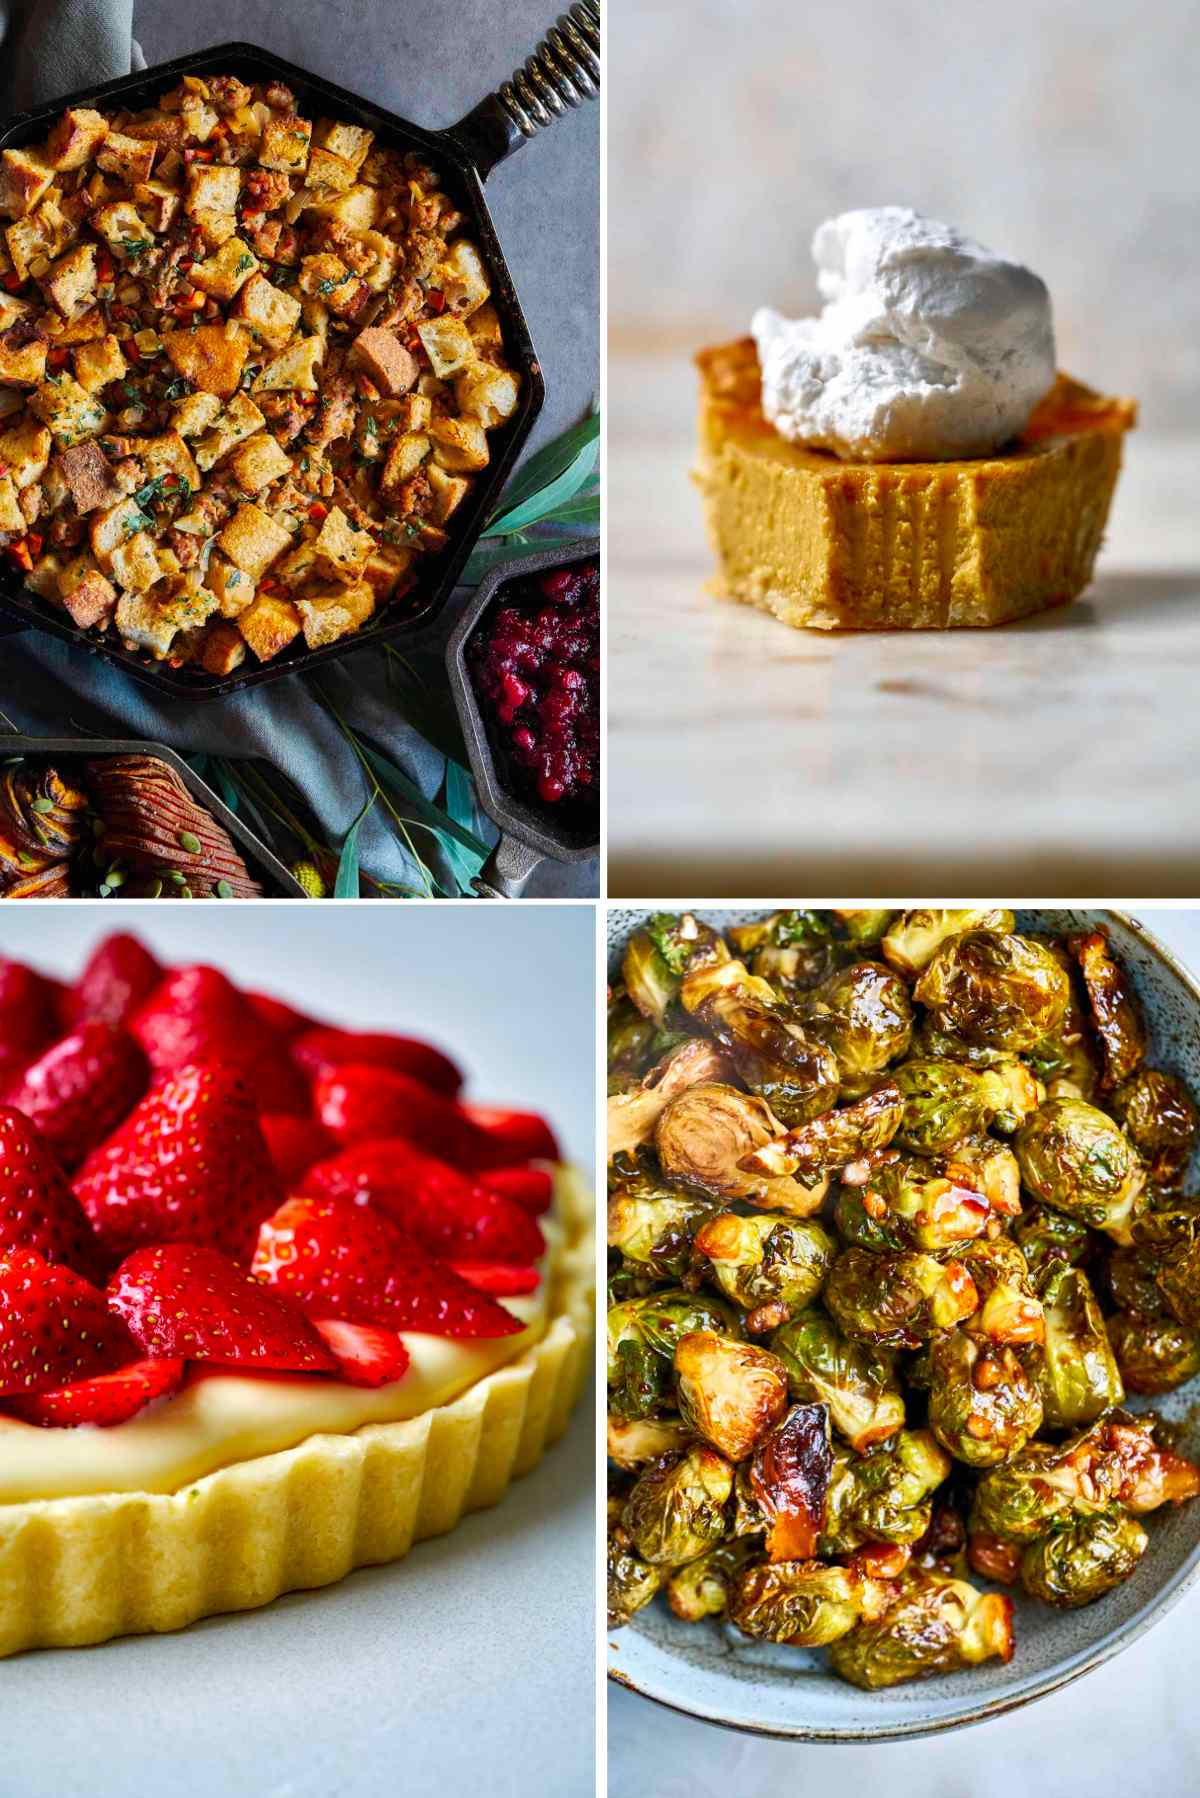 Four thanksgiving dishes tiled in an image with stuffing, pie, brussel sprouts, and a tart.